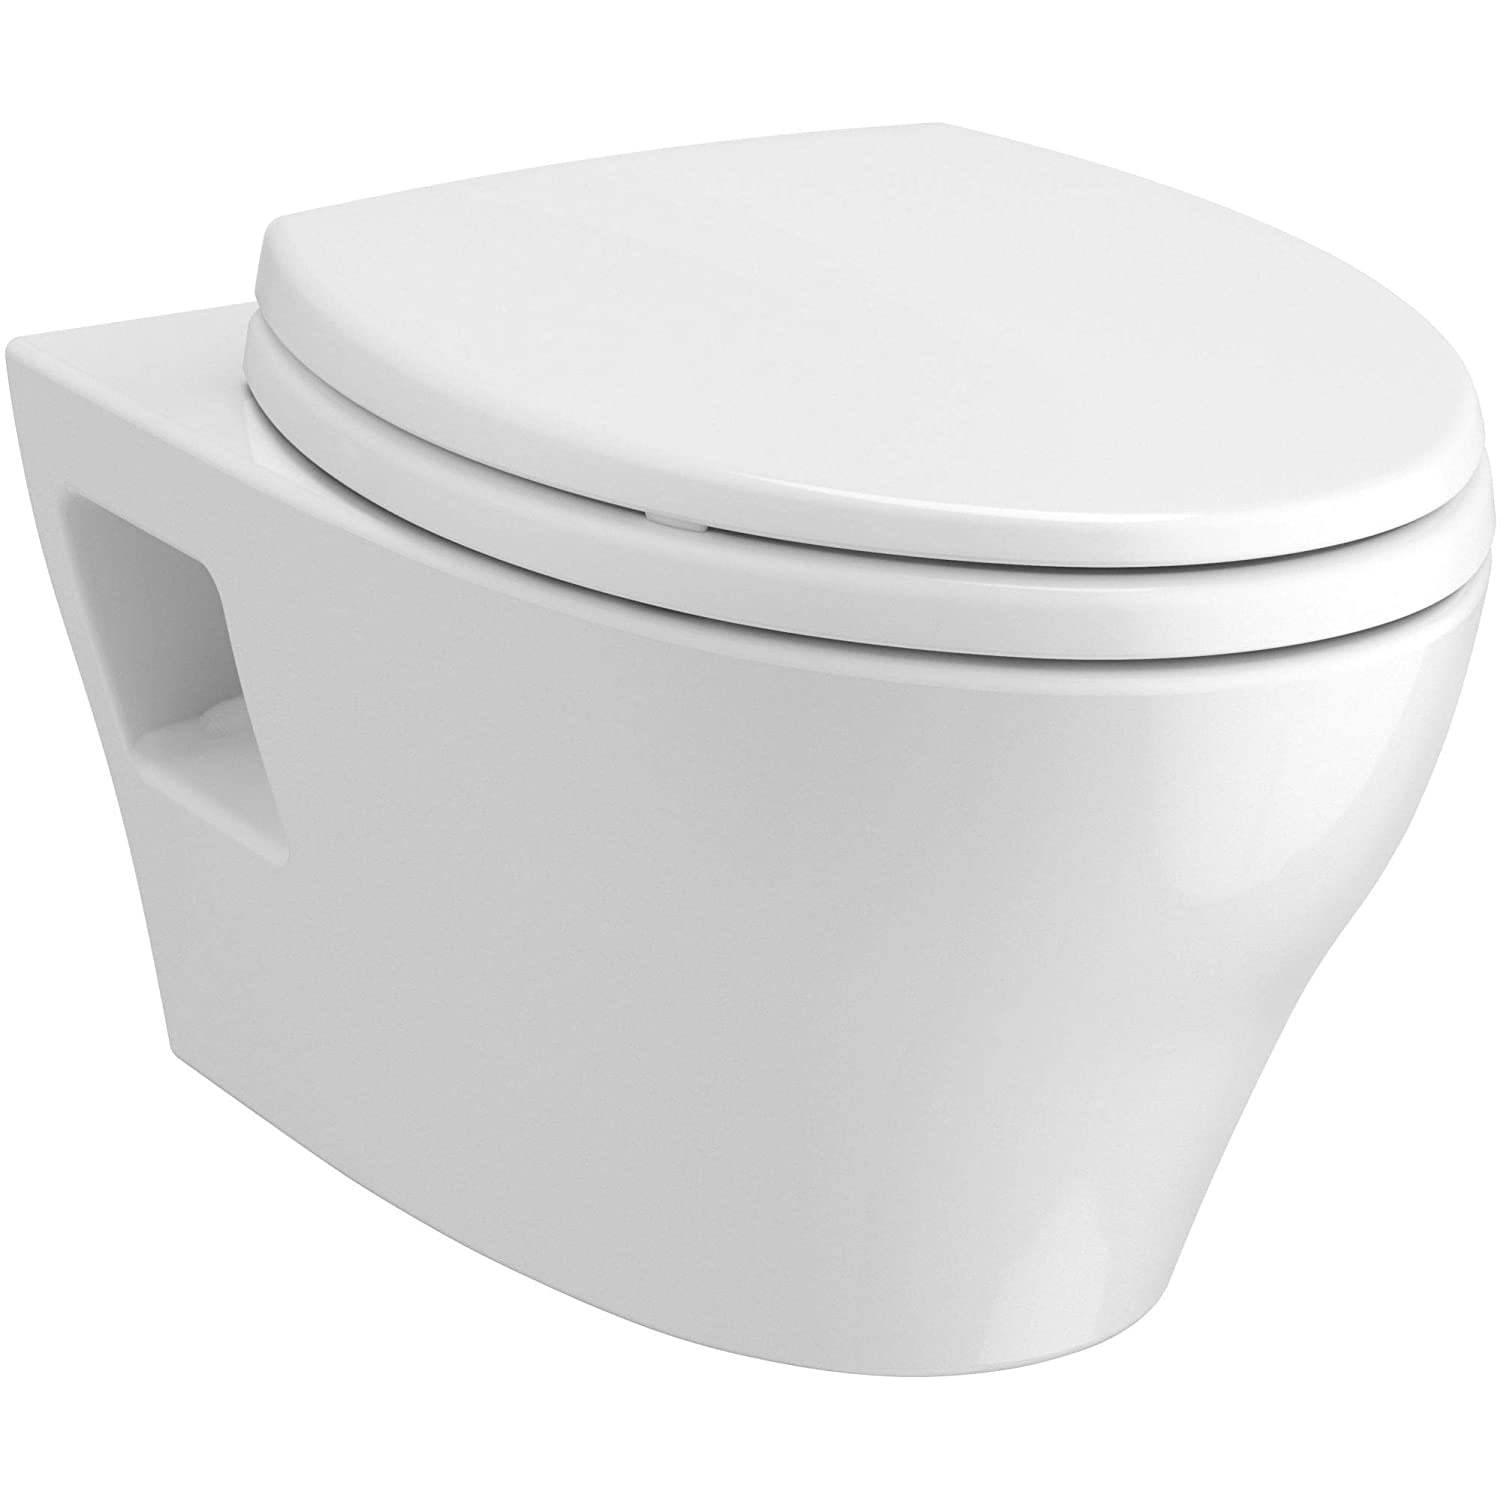 TOTO CT428CFG#01 EP Elongated Wall-Hung Bowl, Cotton White (seat not  included) - SKU - CT428CFG#01